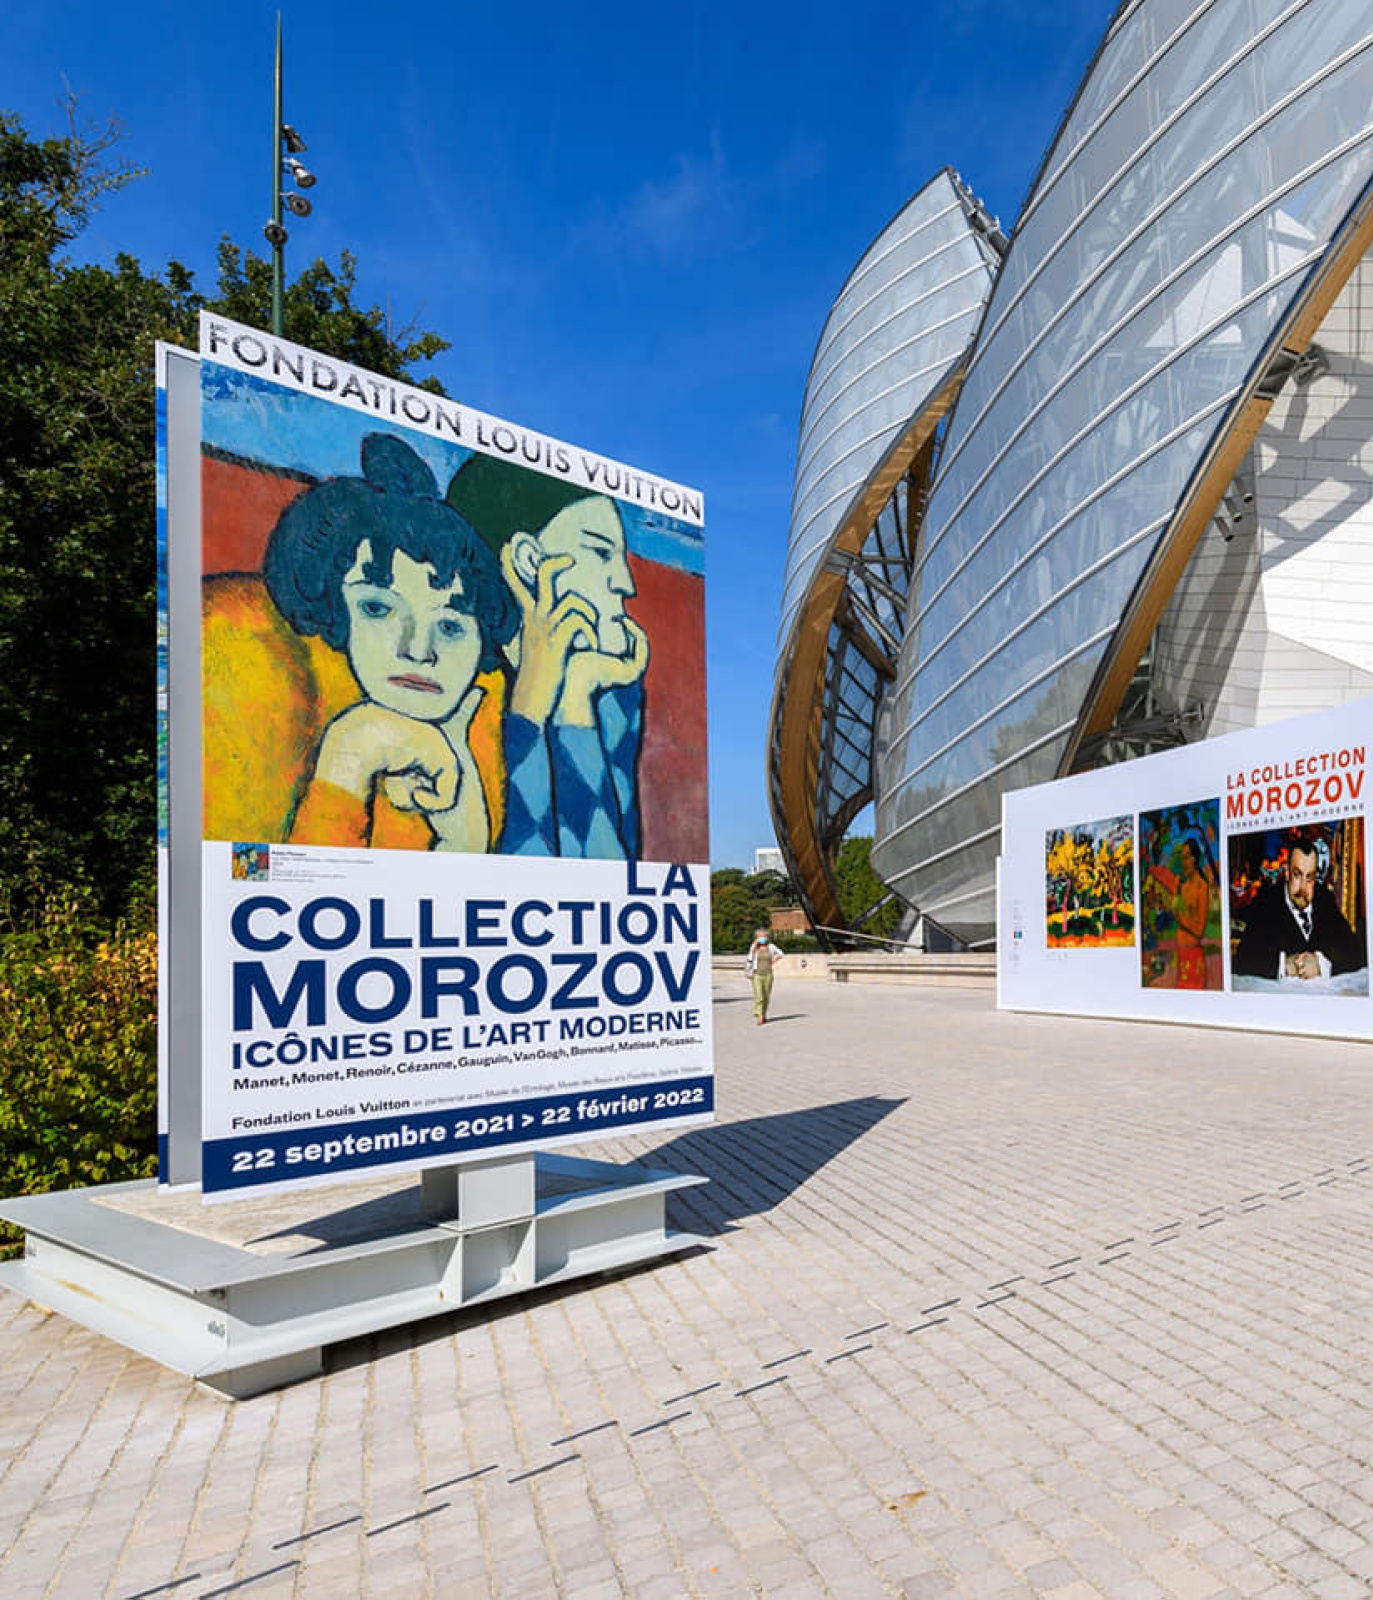 Masterpieces of New Art. Collection of the Morozov Brothers: exhibition 22  September 2021 – 22 February, Fondation Louis Vuitton, Paris, France